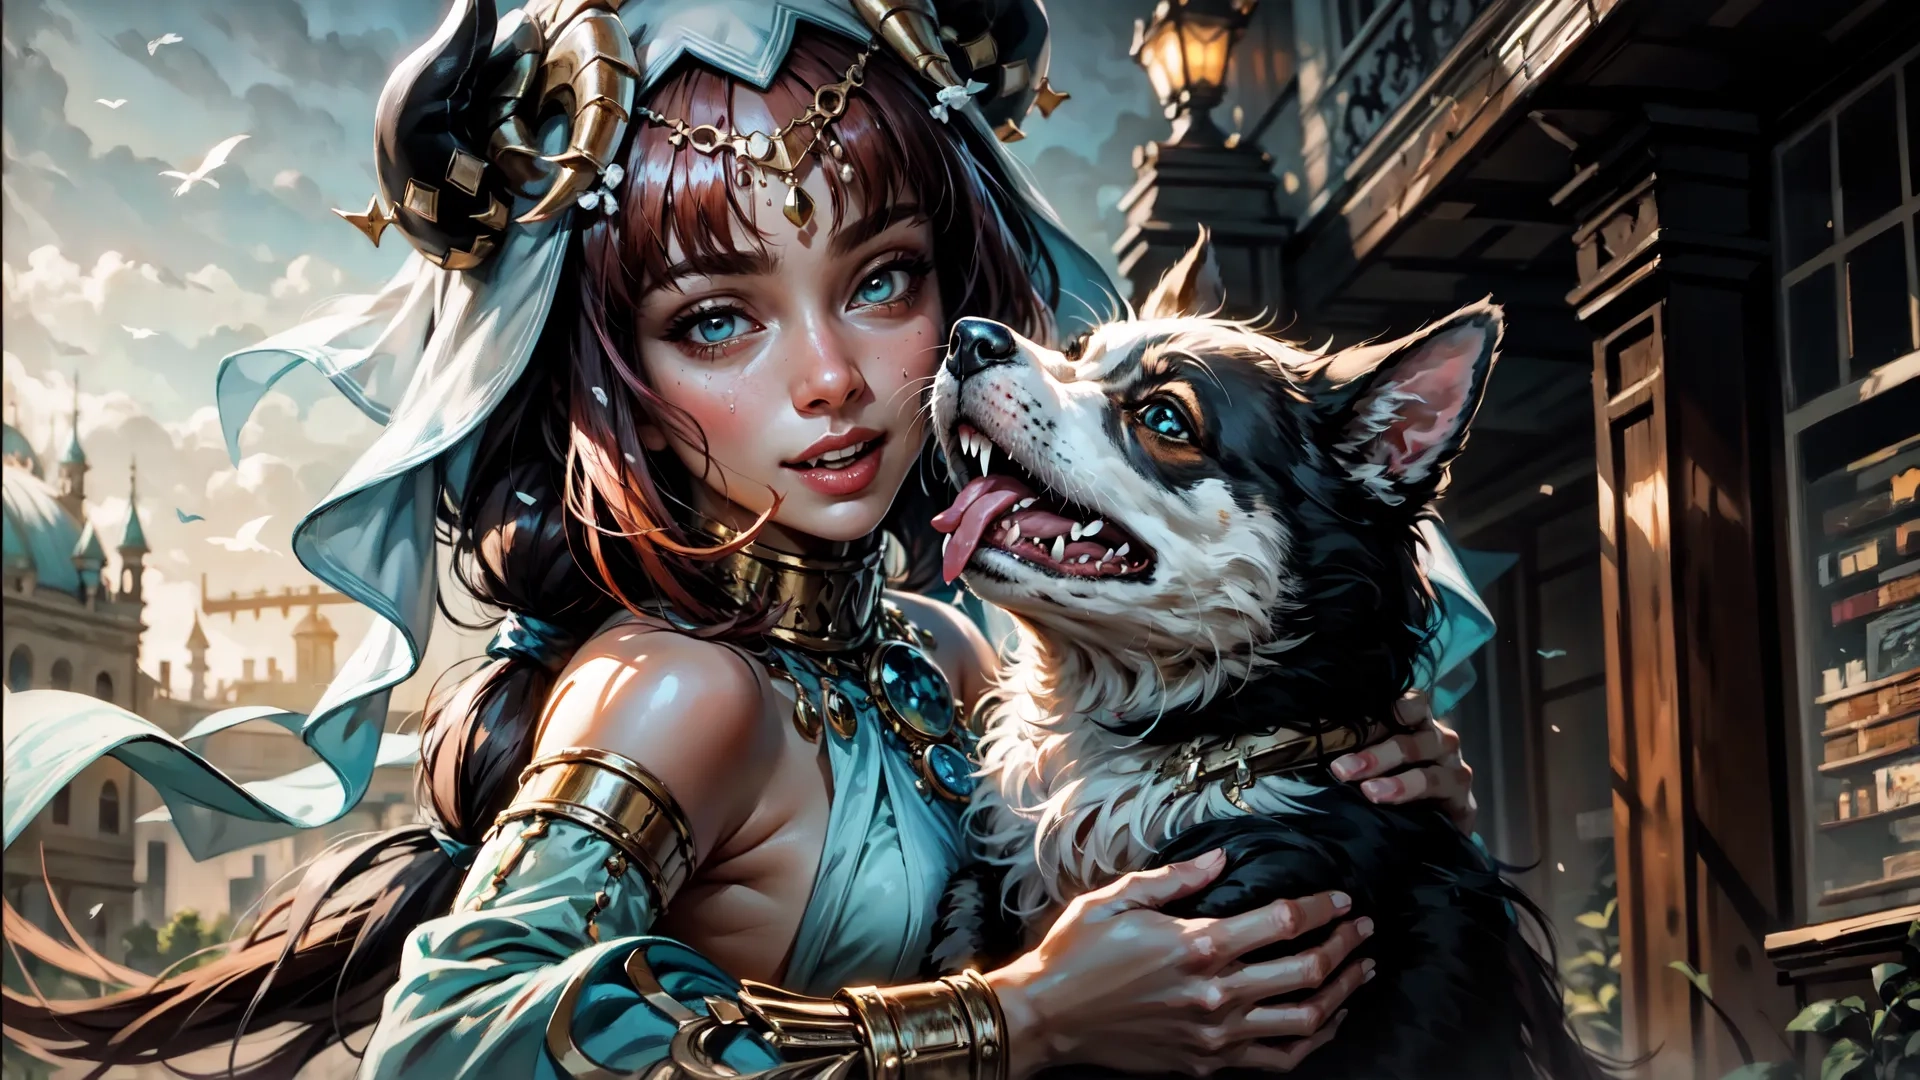 a woman standing next to a dog holding its mouth open while holding it's paw with wings flying around it, on a city street
